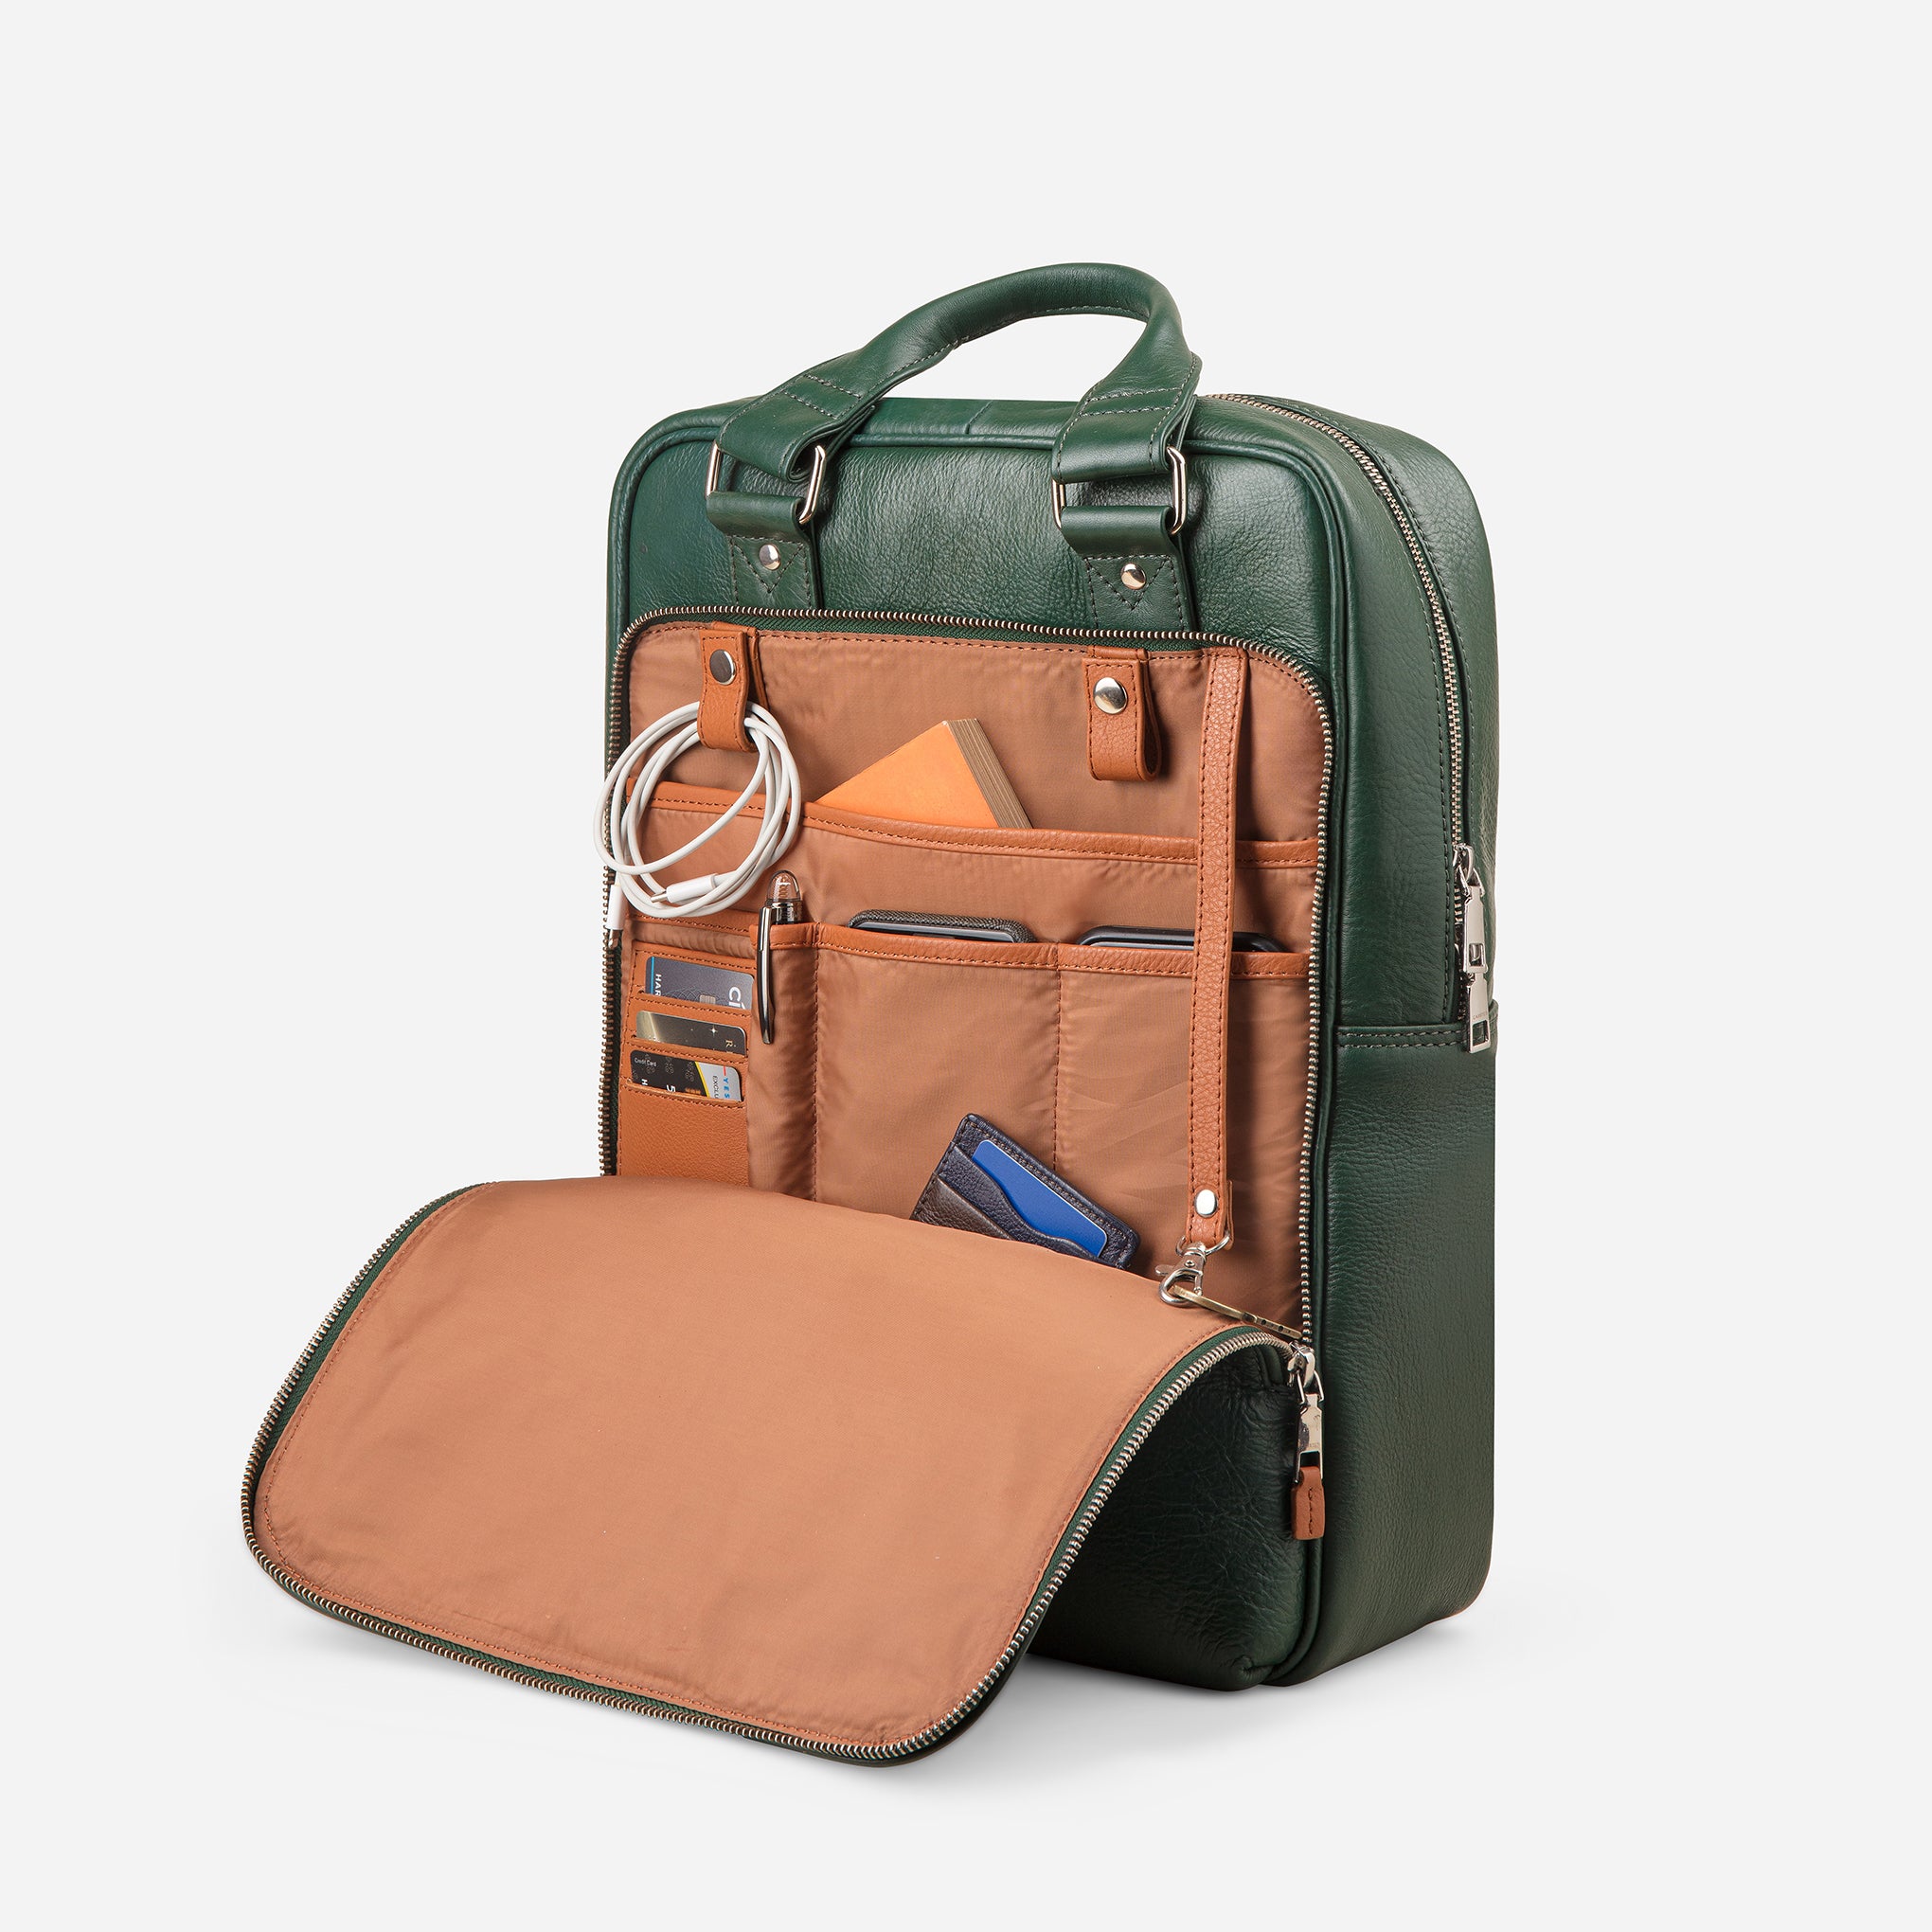 Adventurer Duo - Leather Backpack set in Racing Green & Midnight